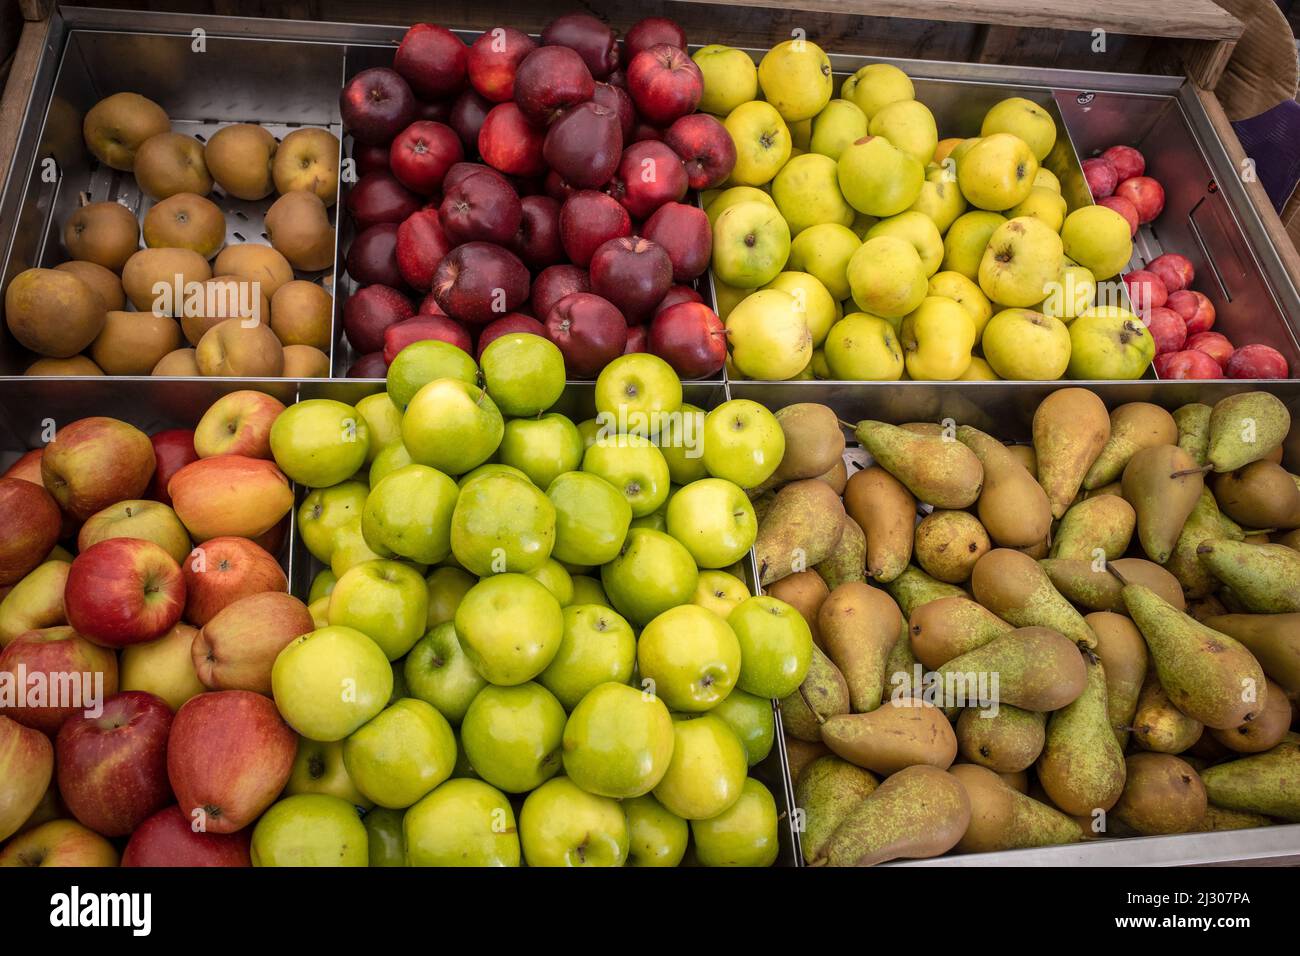 A display of various types green and red of apples and pears in boxes at a grocery store. Stock Photo